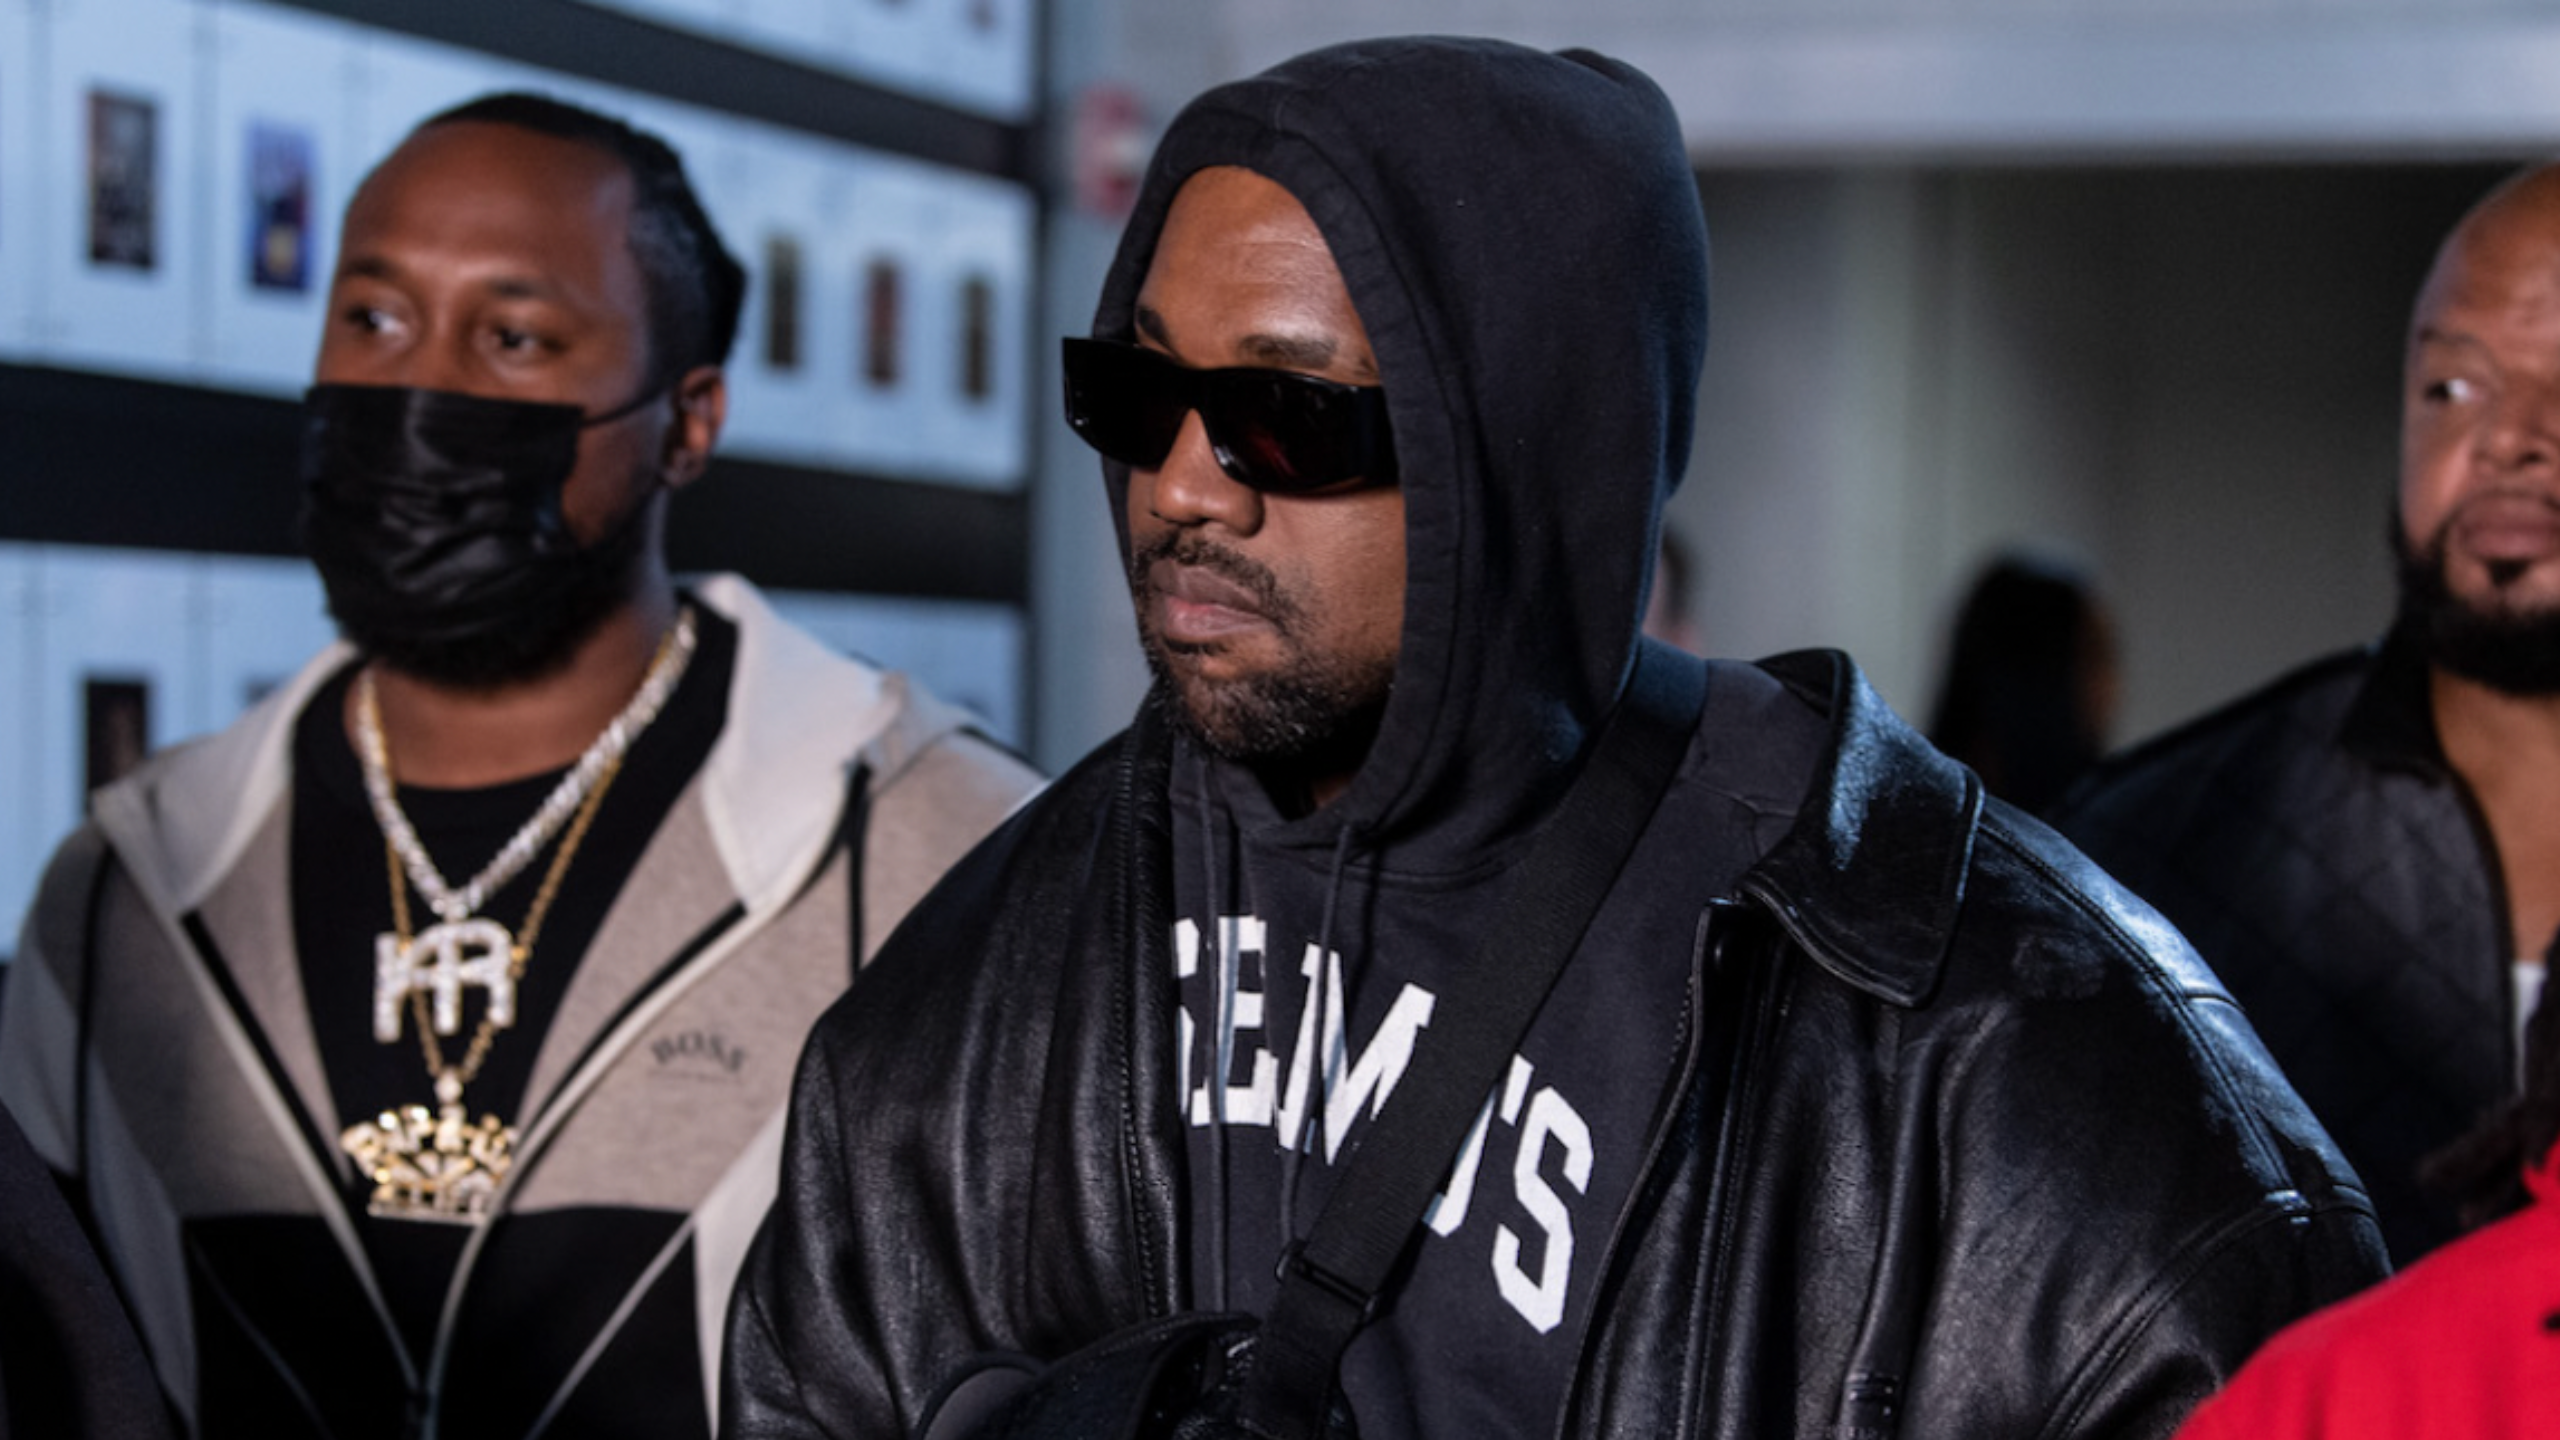 Kanye West Surfaces After Twitter Ban To Accuse Elon Musk Of Being ‘Half Chinese’ AND a Clone — Like Obama (mediaite.com)